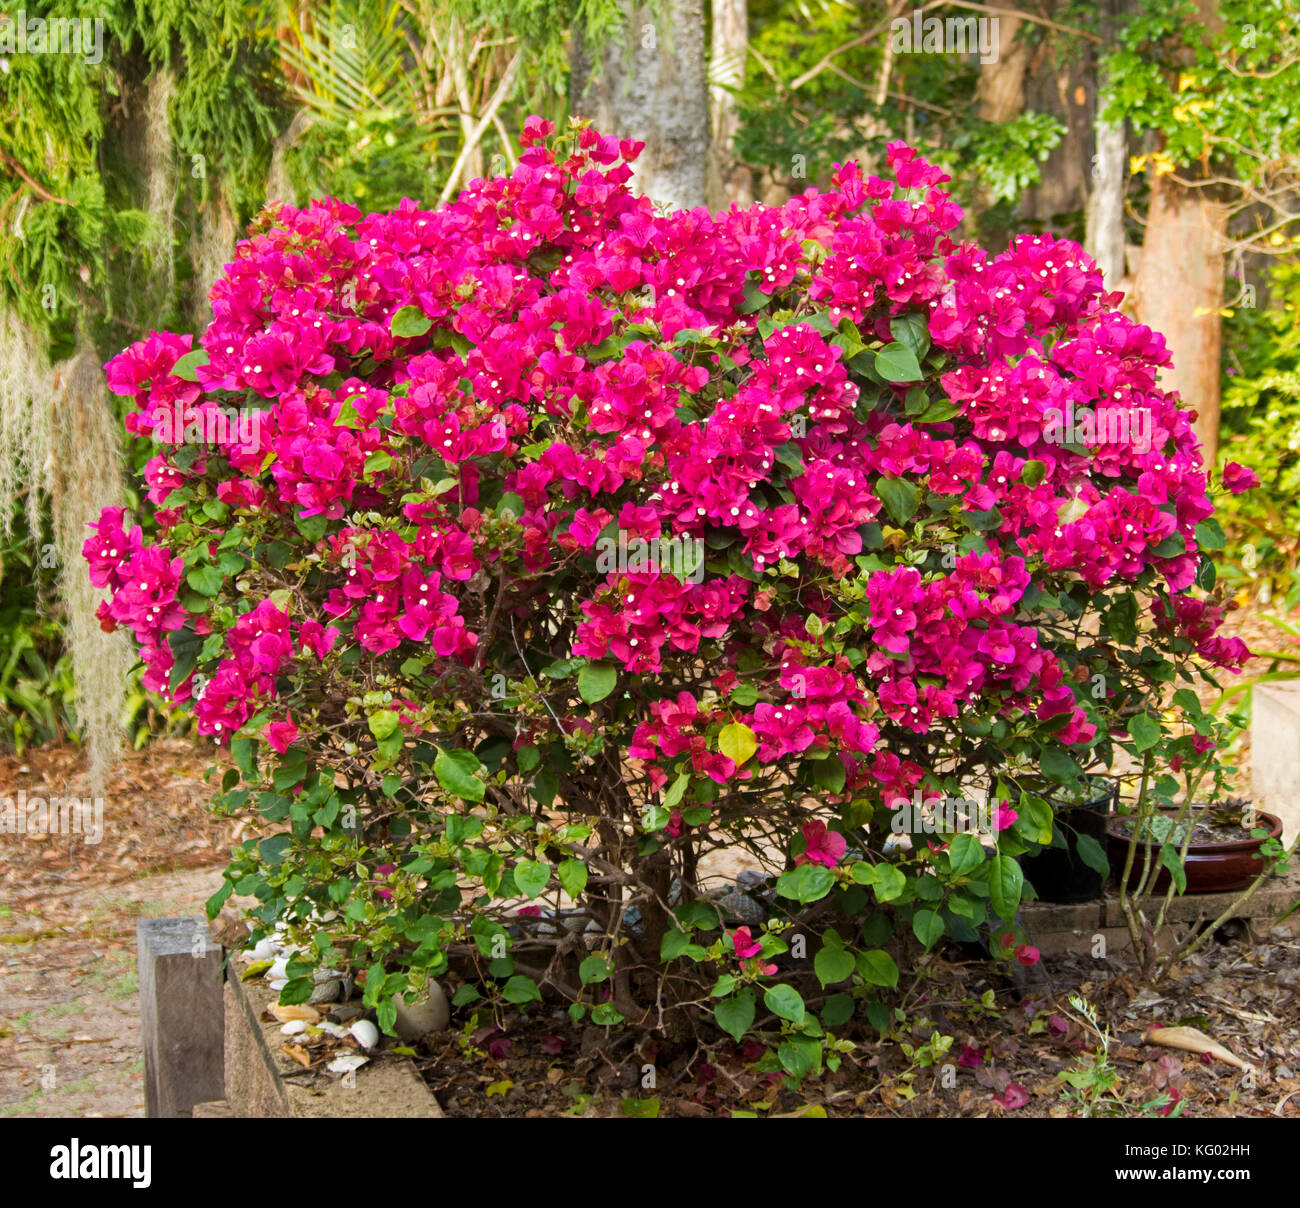 Bougainvillea bambino 'Bokay', evergreen shrub covered with mass of vivid red flowers in sub-tropical garden in Australia Stock Photo